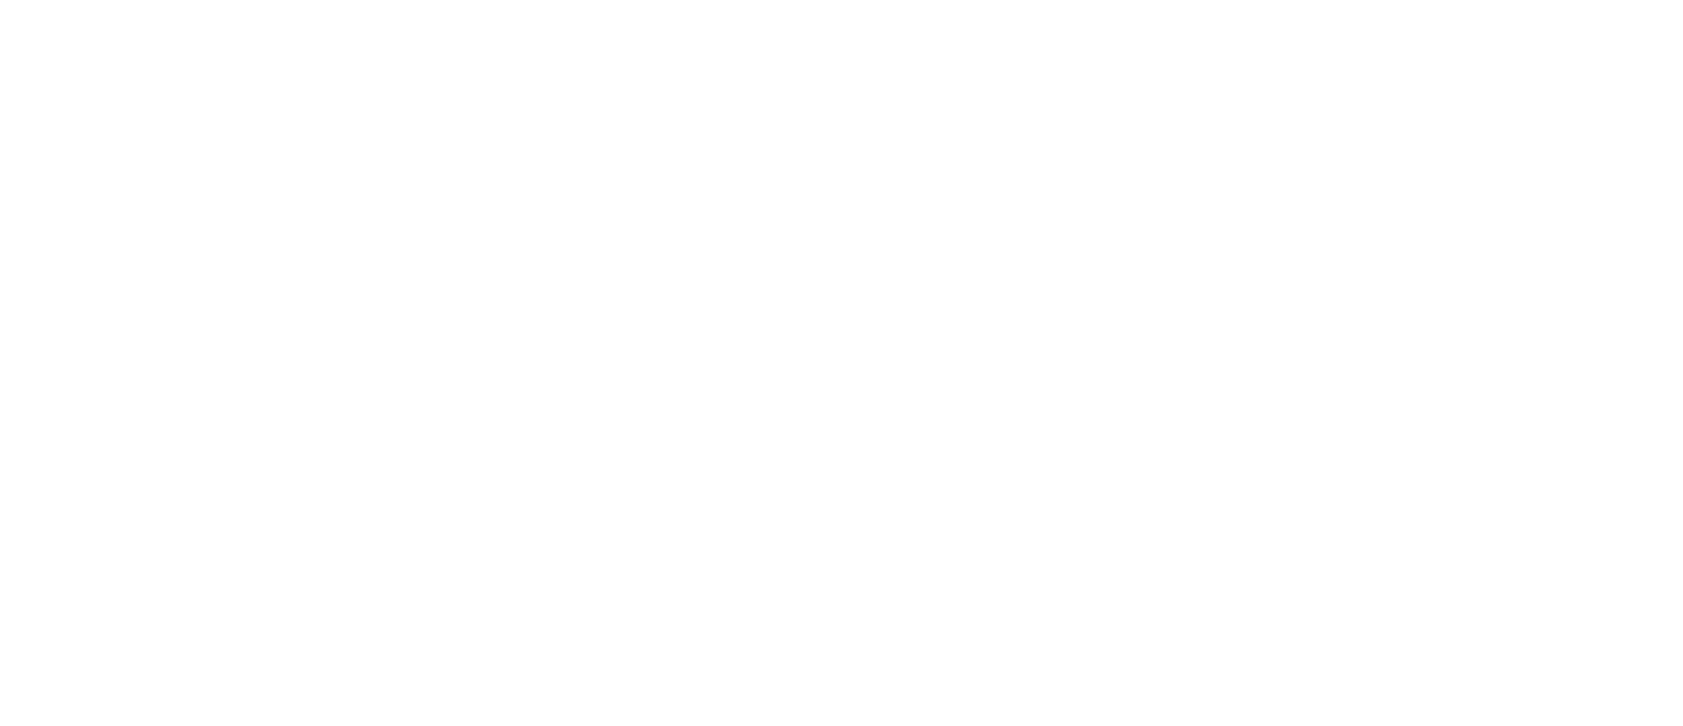 Angus Dundee Distillers